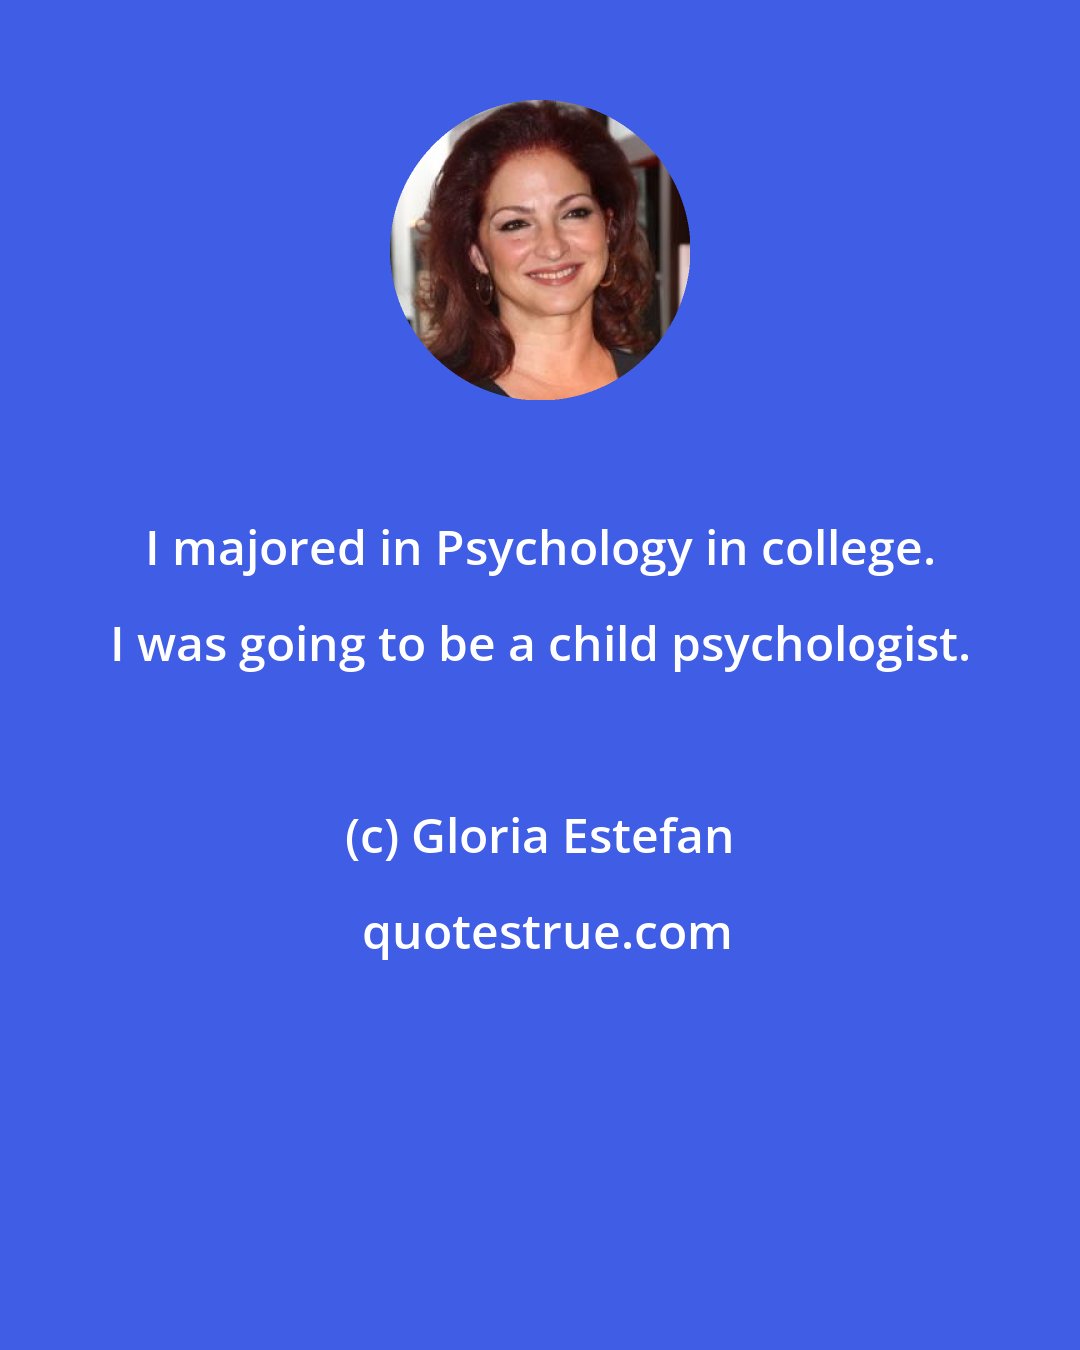 Gloria Estefan: I majored in Psychology in college. I was going to be a child psychologist.